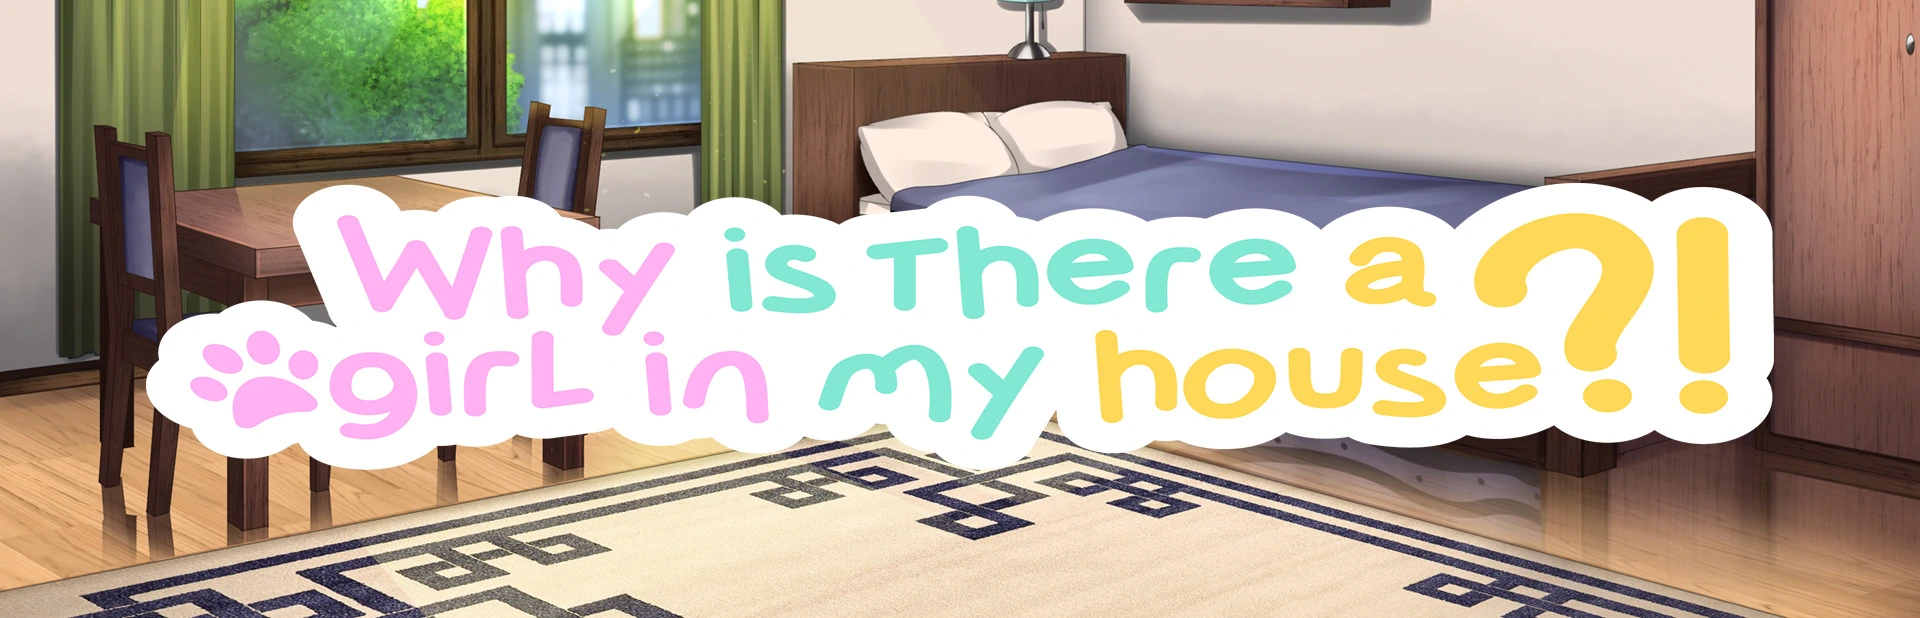 Why Is There A Girl In My House?! [v1.0] main image